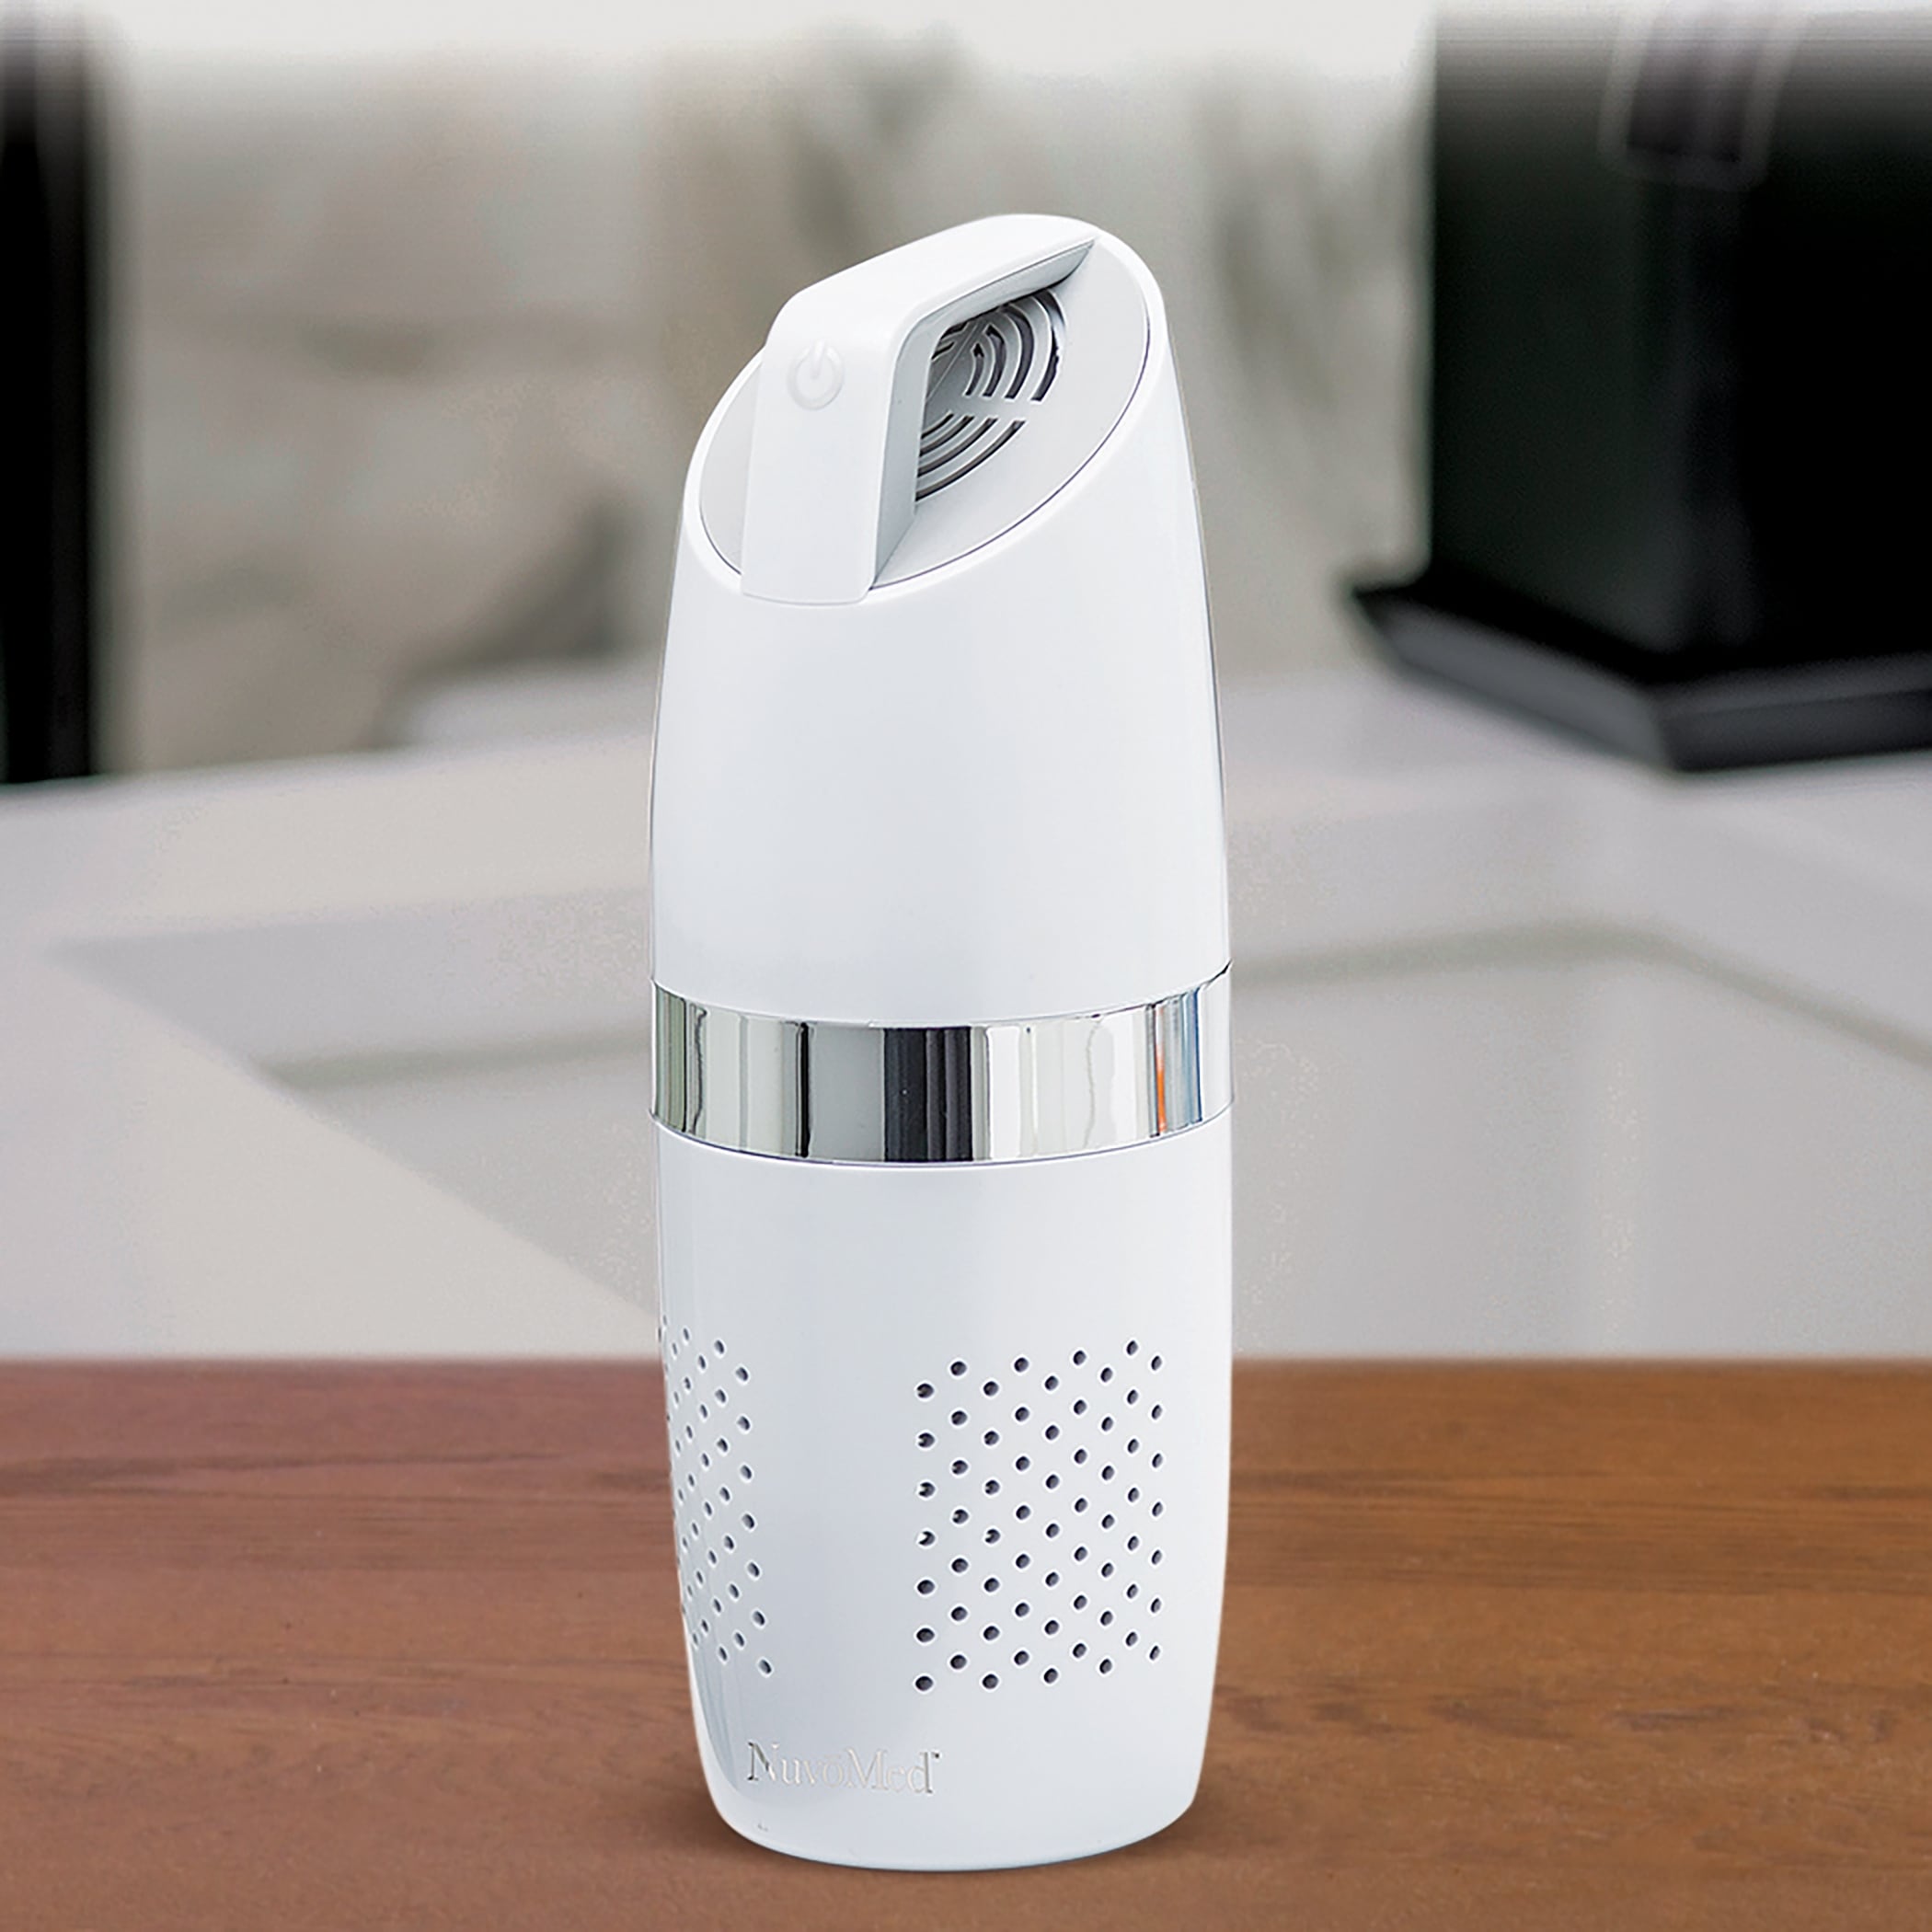 Compact Portable Air Purifier with HEPA Filter - 10.630 x 5.250 x 3.700